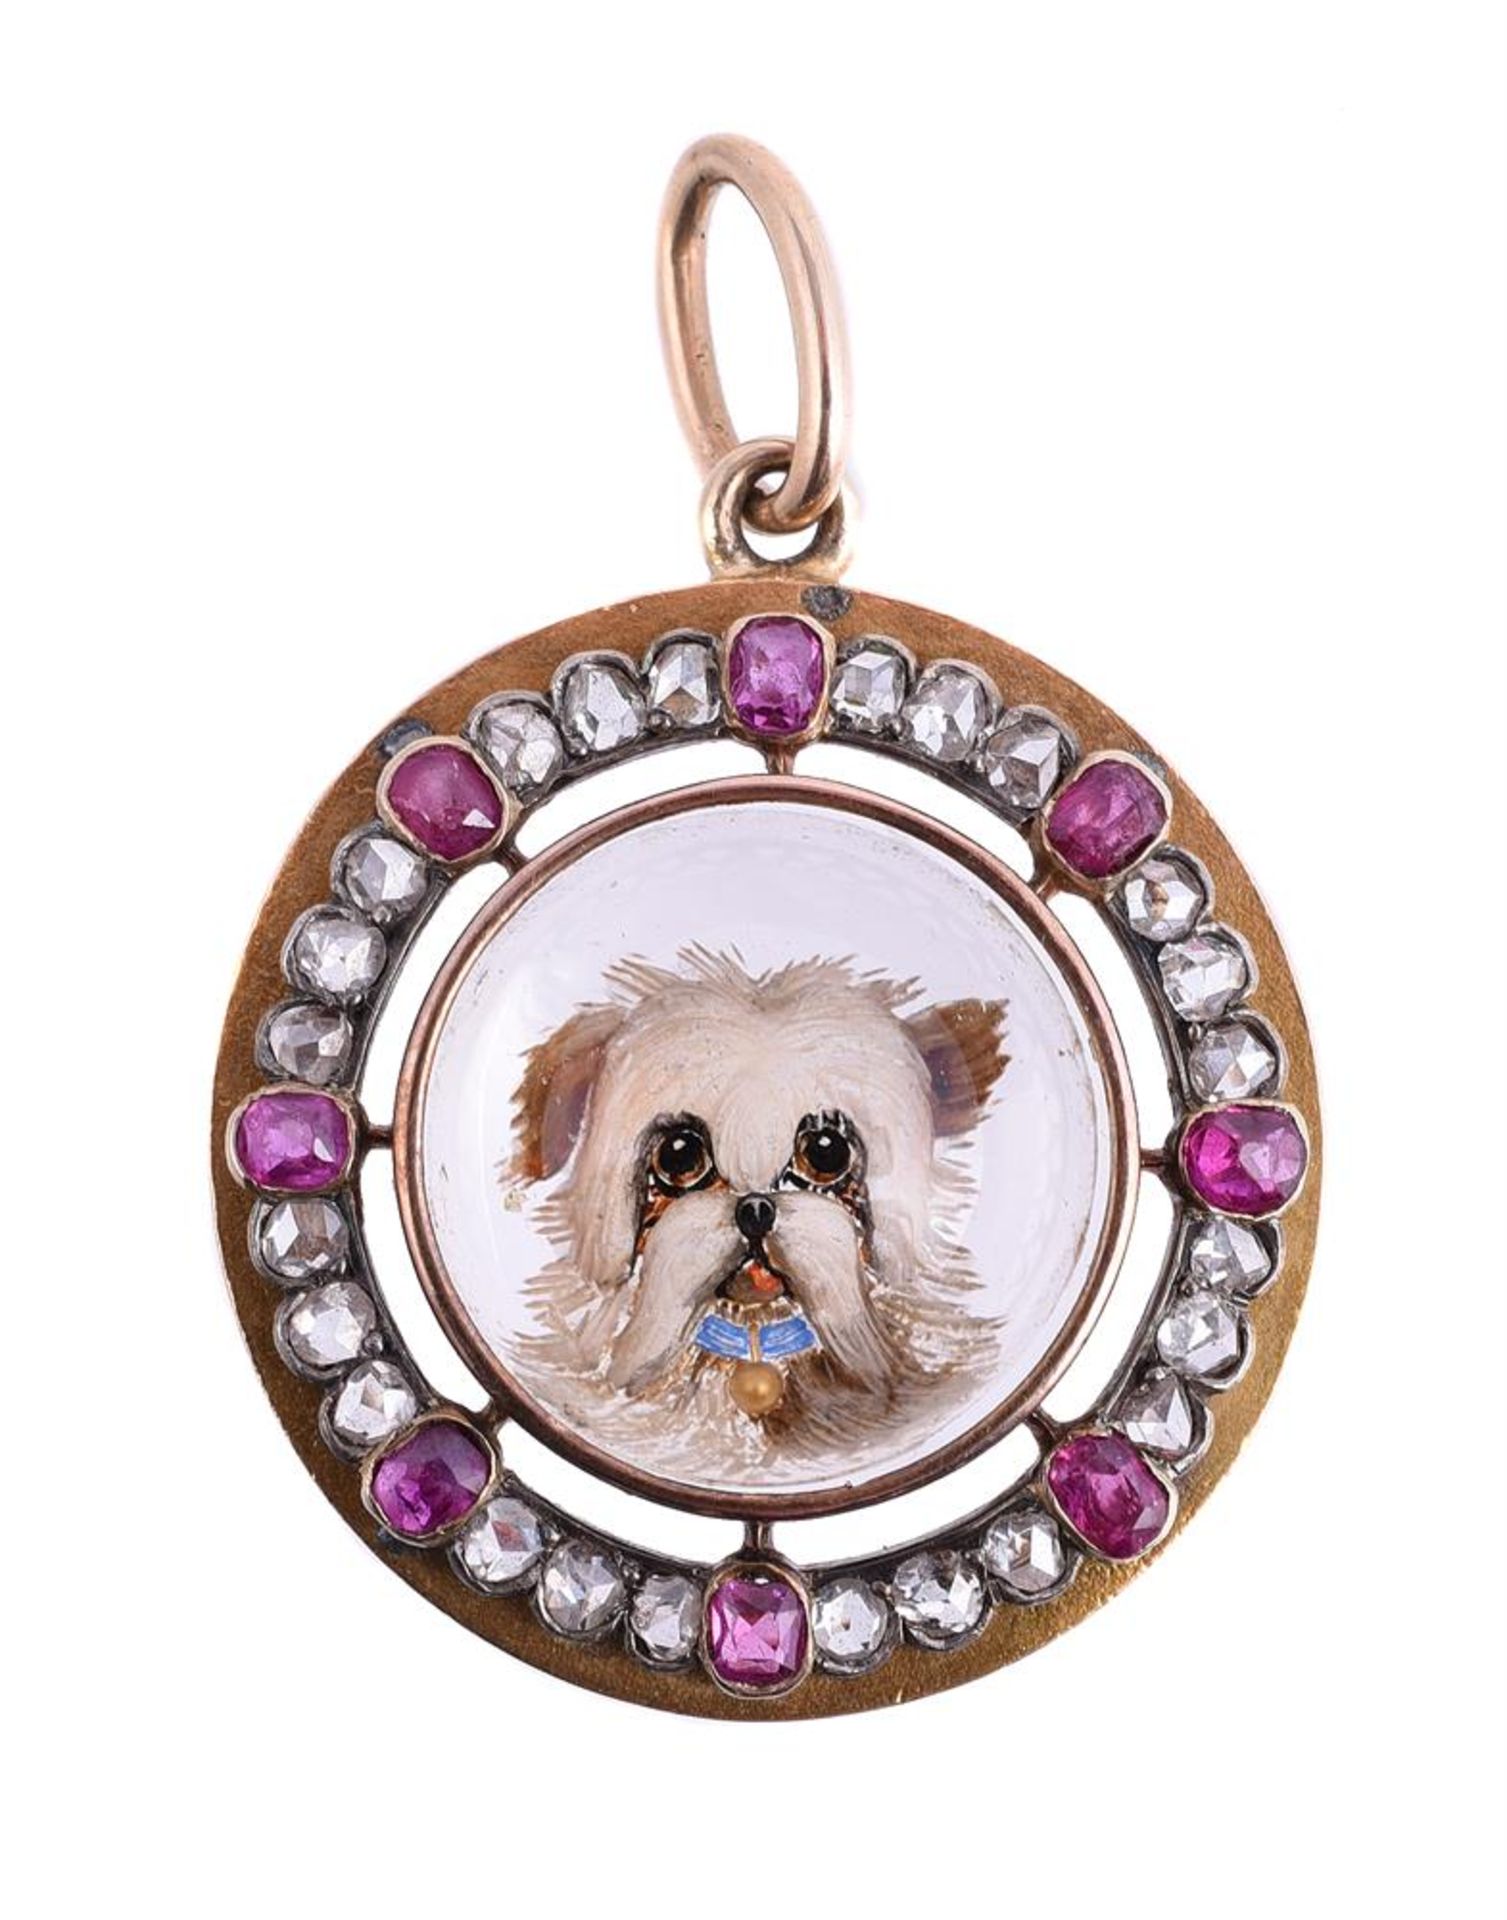 A LATE VICTORIAN ESSEX CRYSTAL PENDANT OF A LONG HAIRED TERRIER, CIRCA 1890